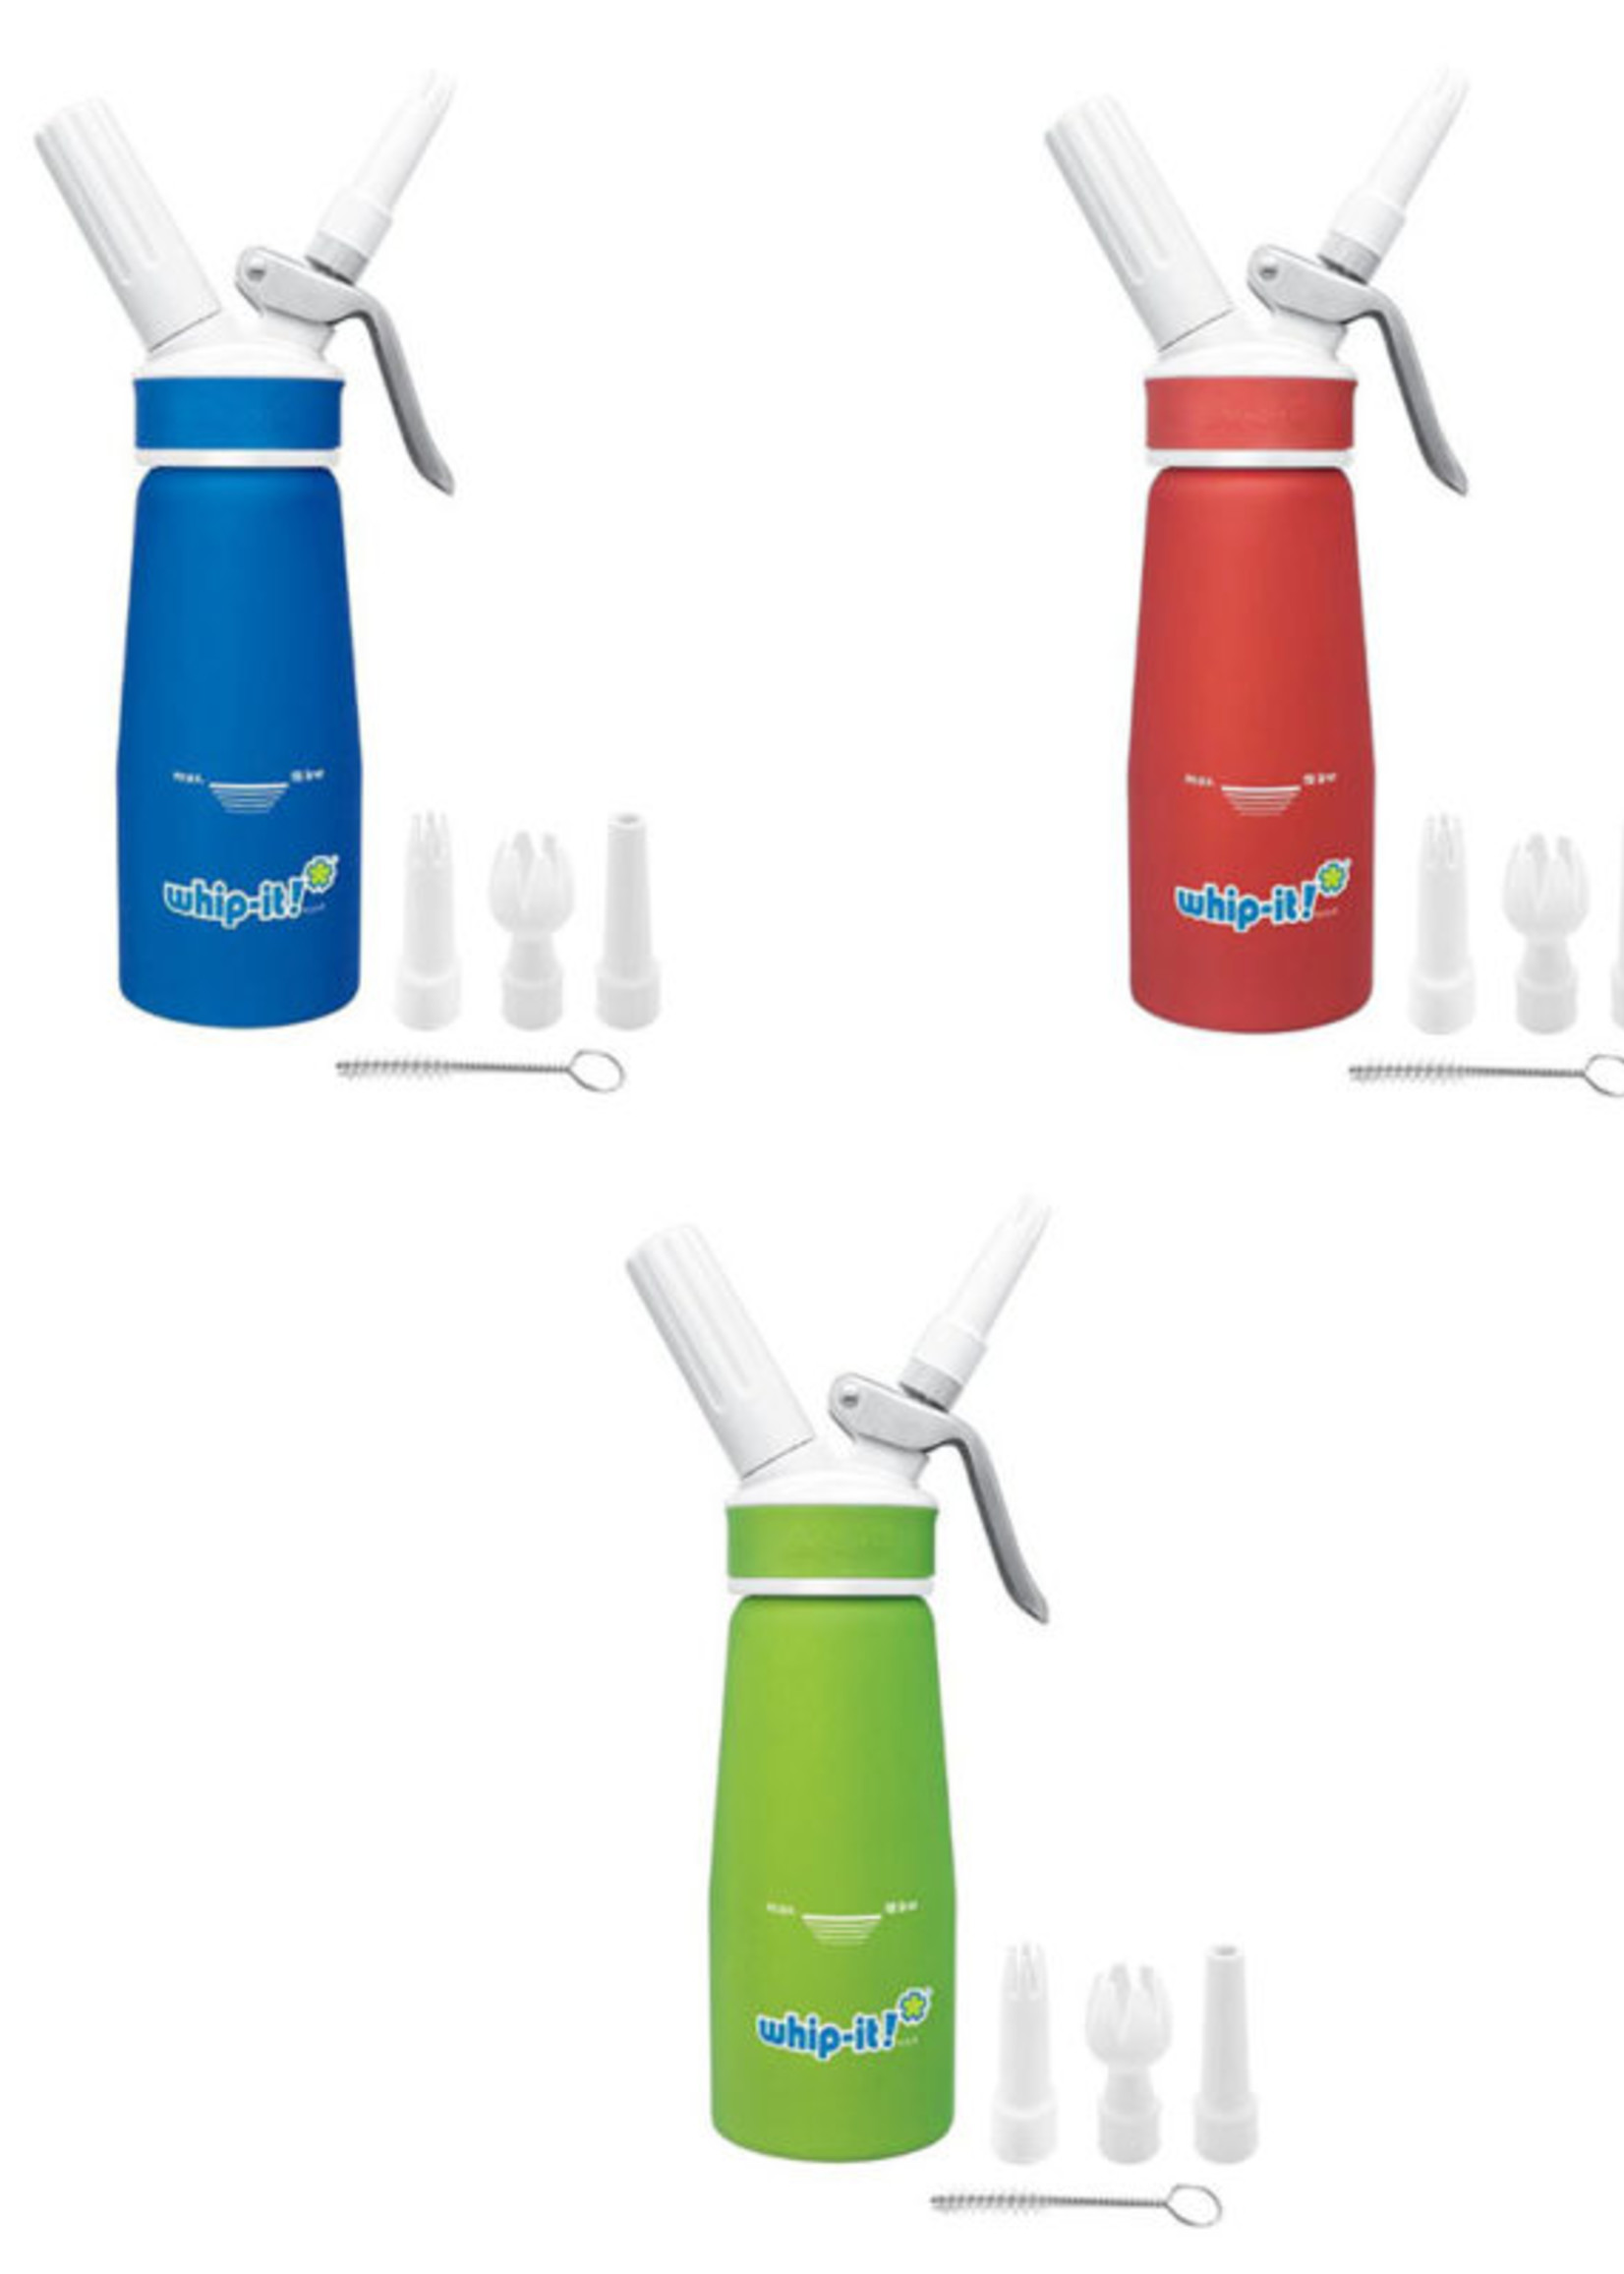 Whip It 1/4 L Whip-It! Pro Dispenser â€“ Coated Style